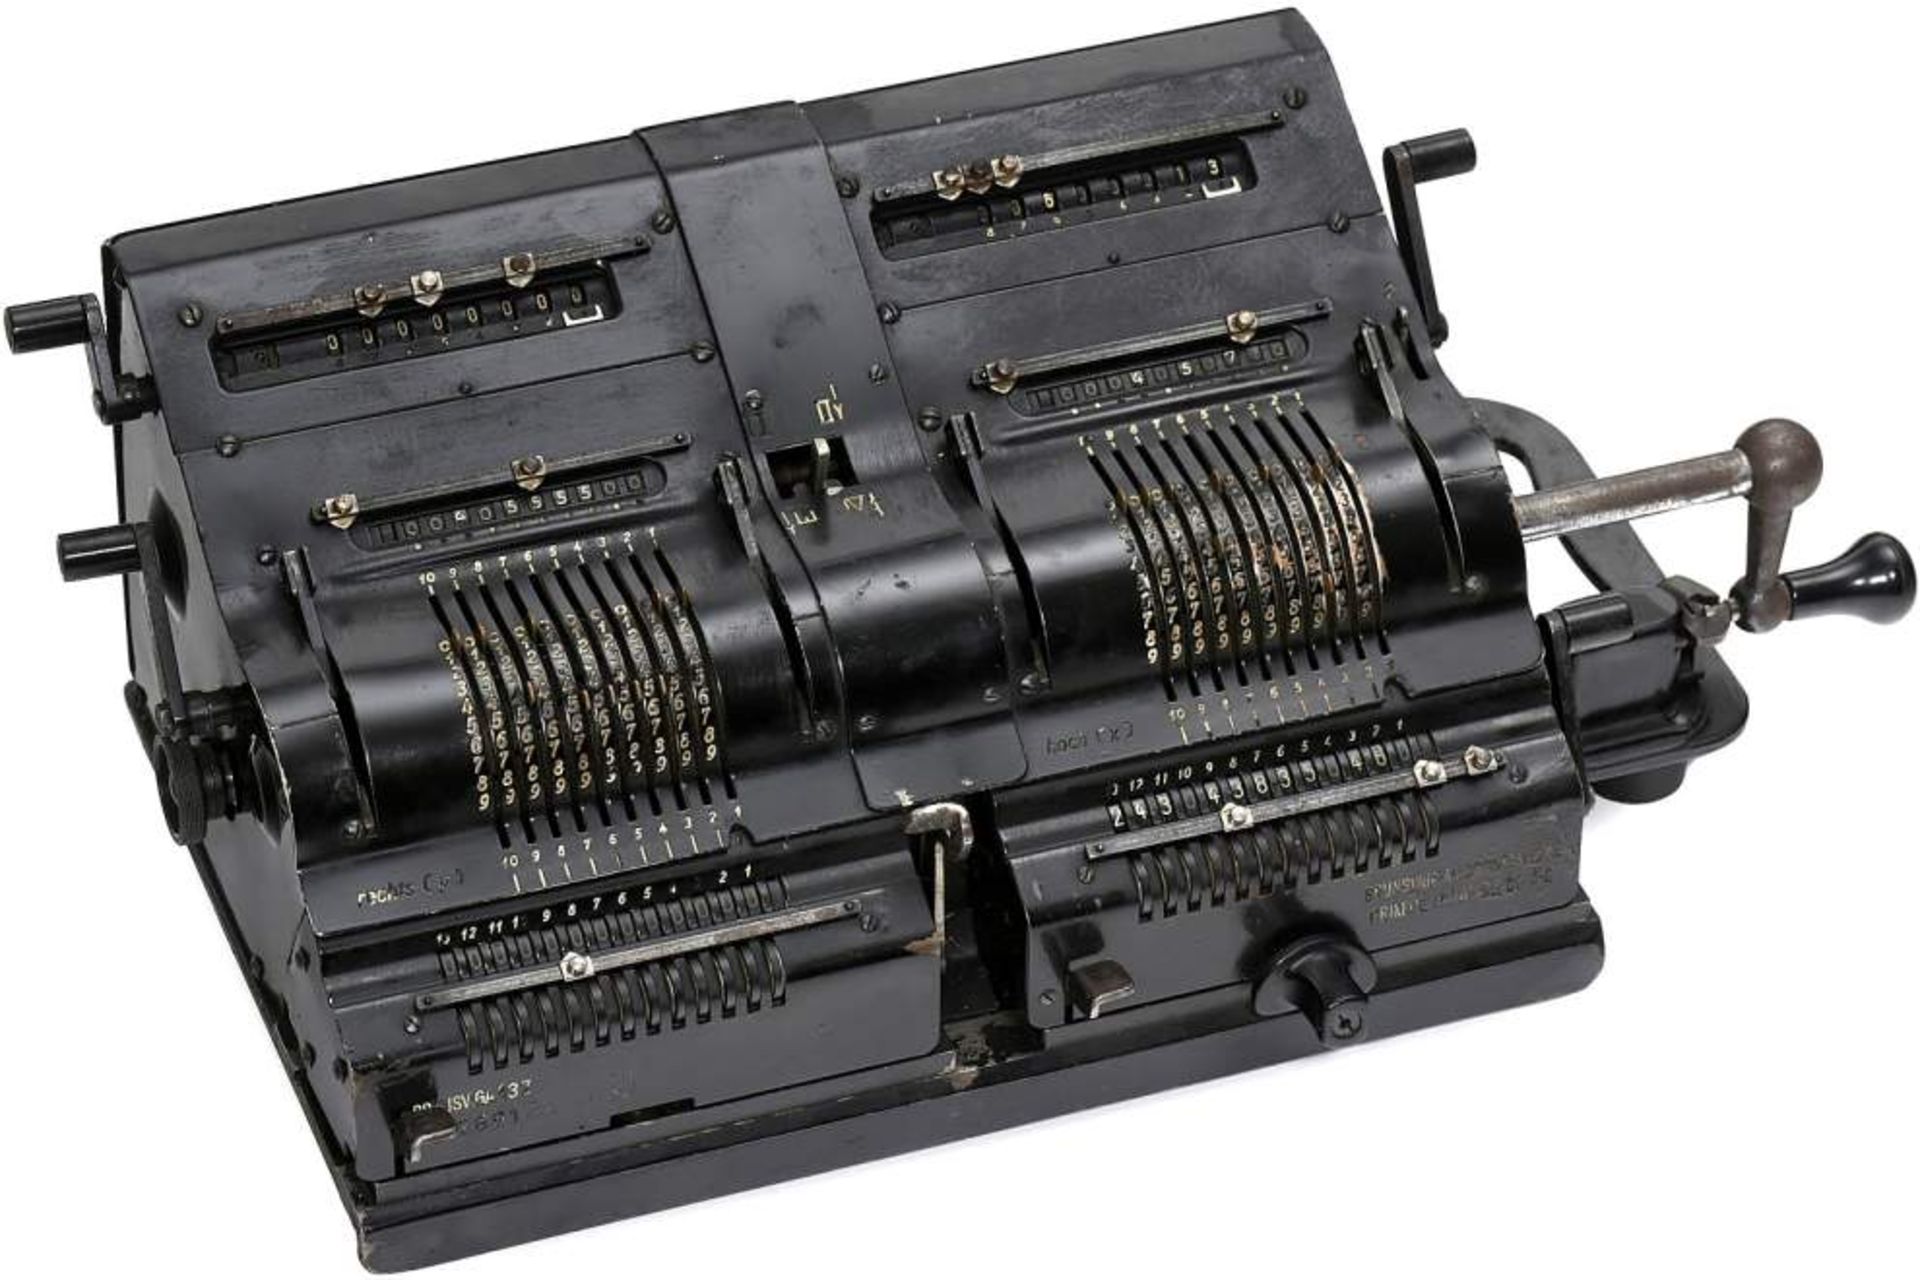 Brunsviga 13 Z Twin Calculator, 1932
Rare duplex machine for special calculations in surveying and